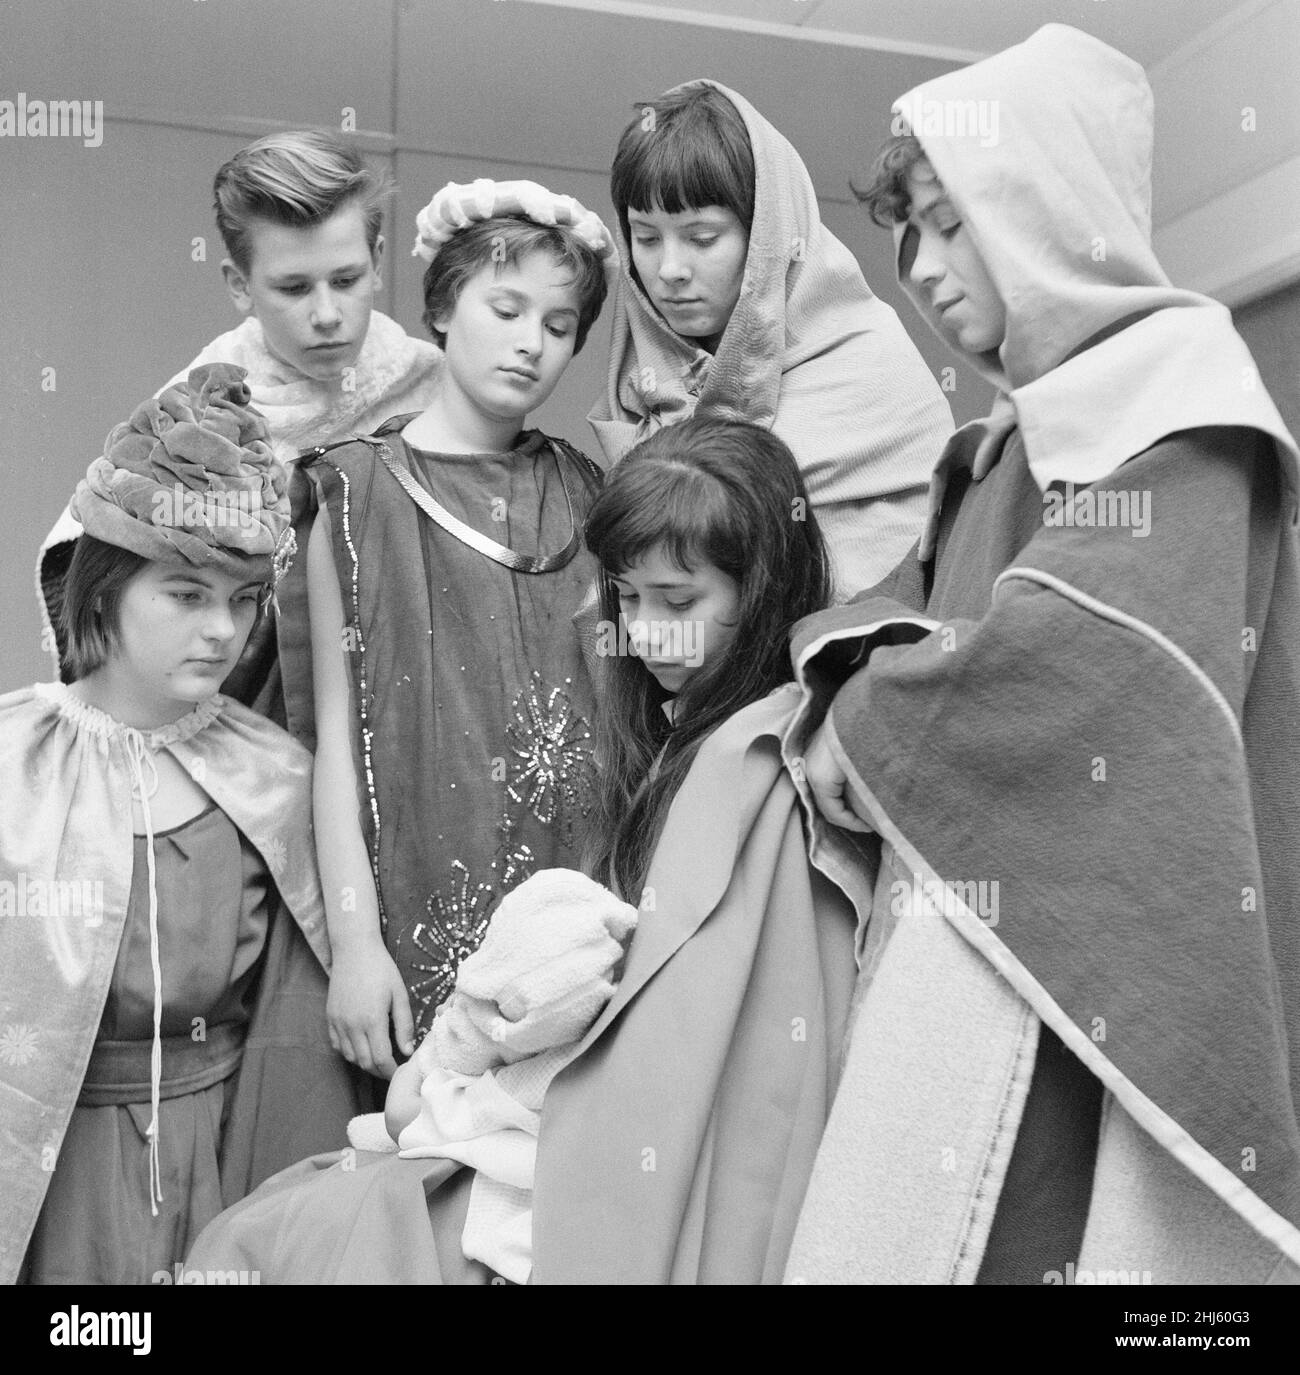 Children in rehearsals for Christmas Play at Pestalozzi Village for Children in Sedlescombe, East Sussex, December 1960. The community is named after eighteenth century Swiss educationalist, Johann Heinrich Pestalozzi, who devoted his life to closing divisions in society through education of the whole person - their Head, Heart and Hands. Stock Photo